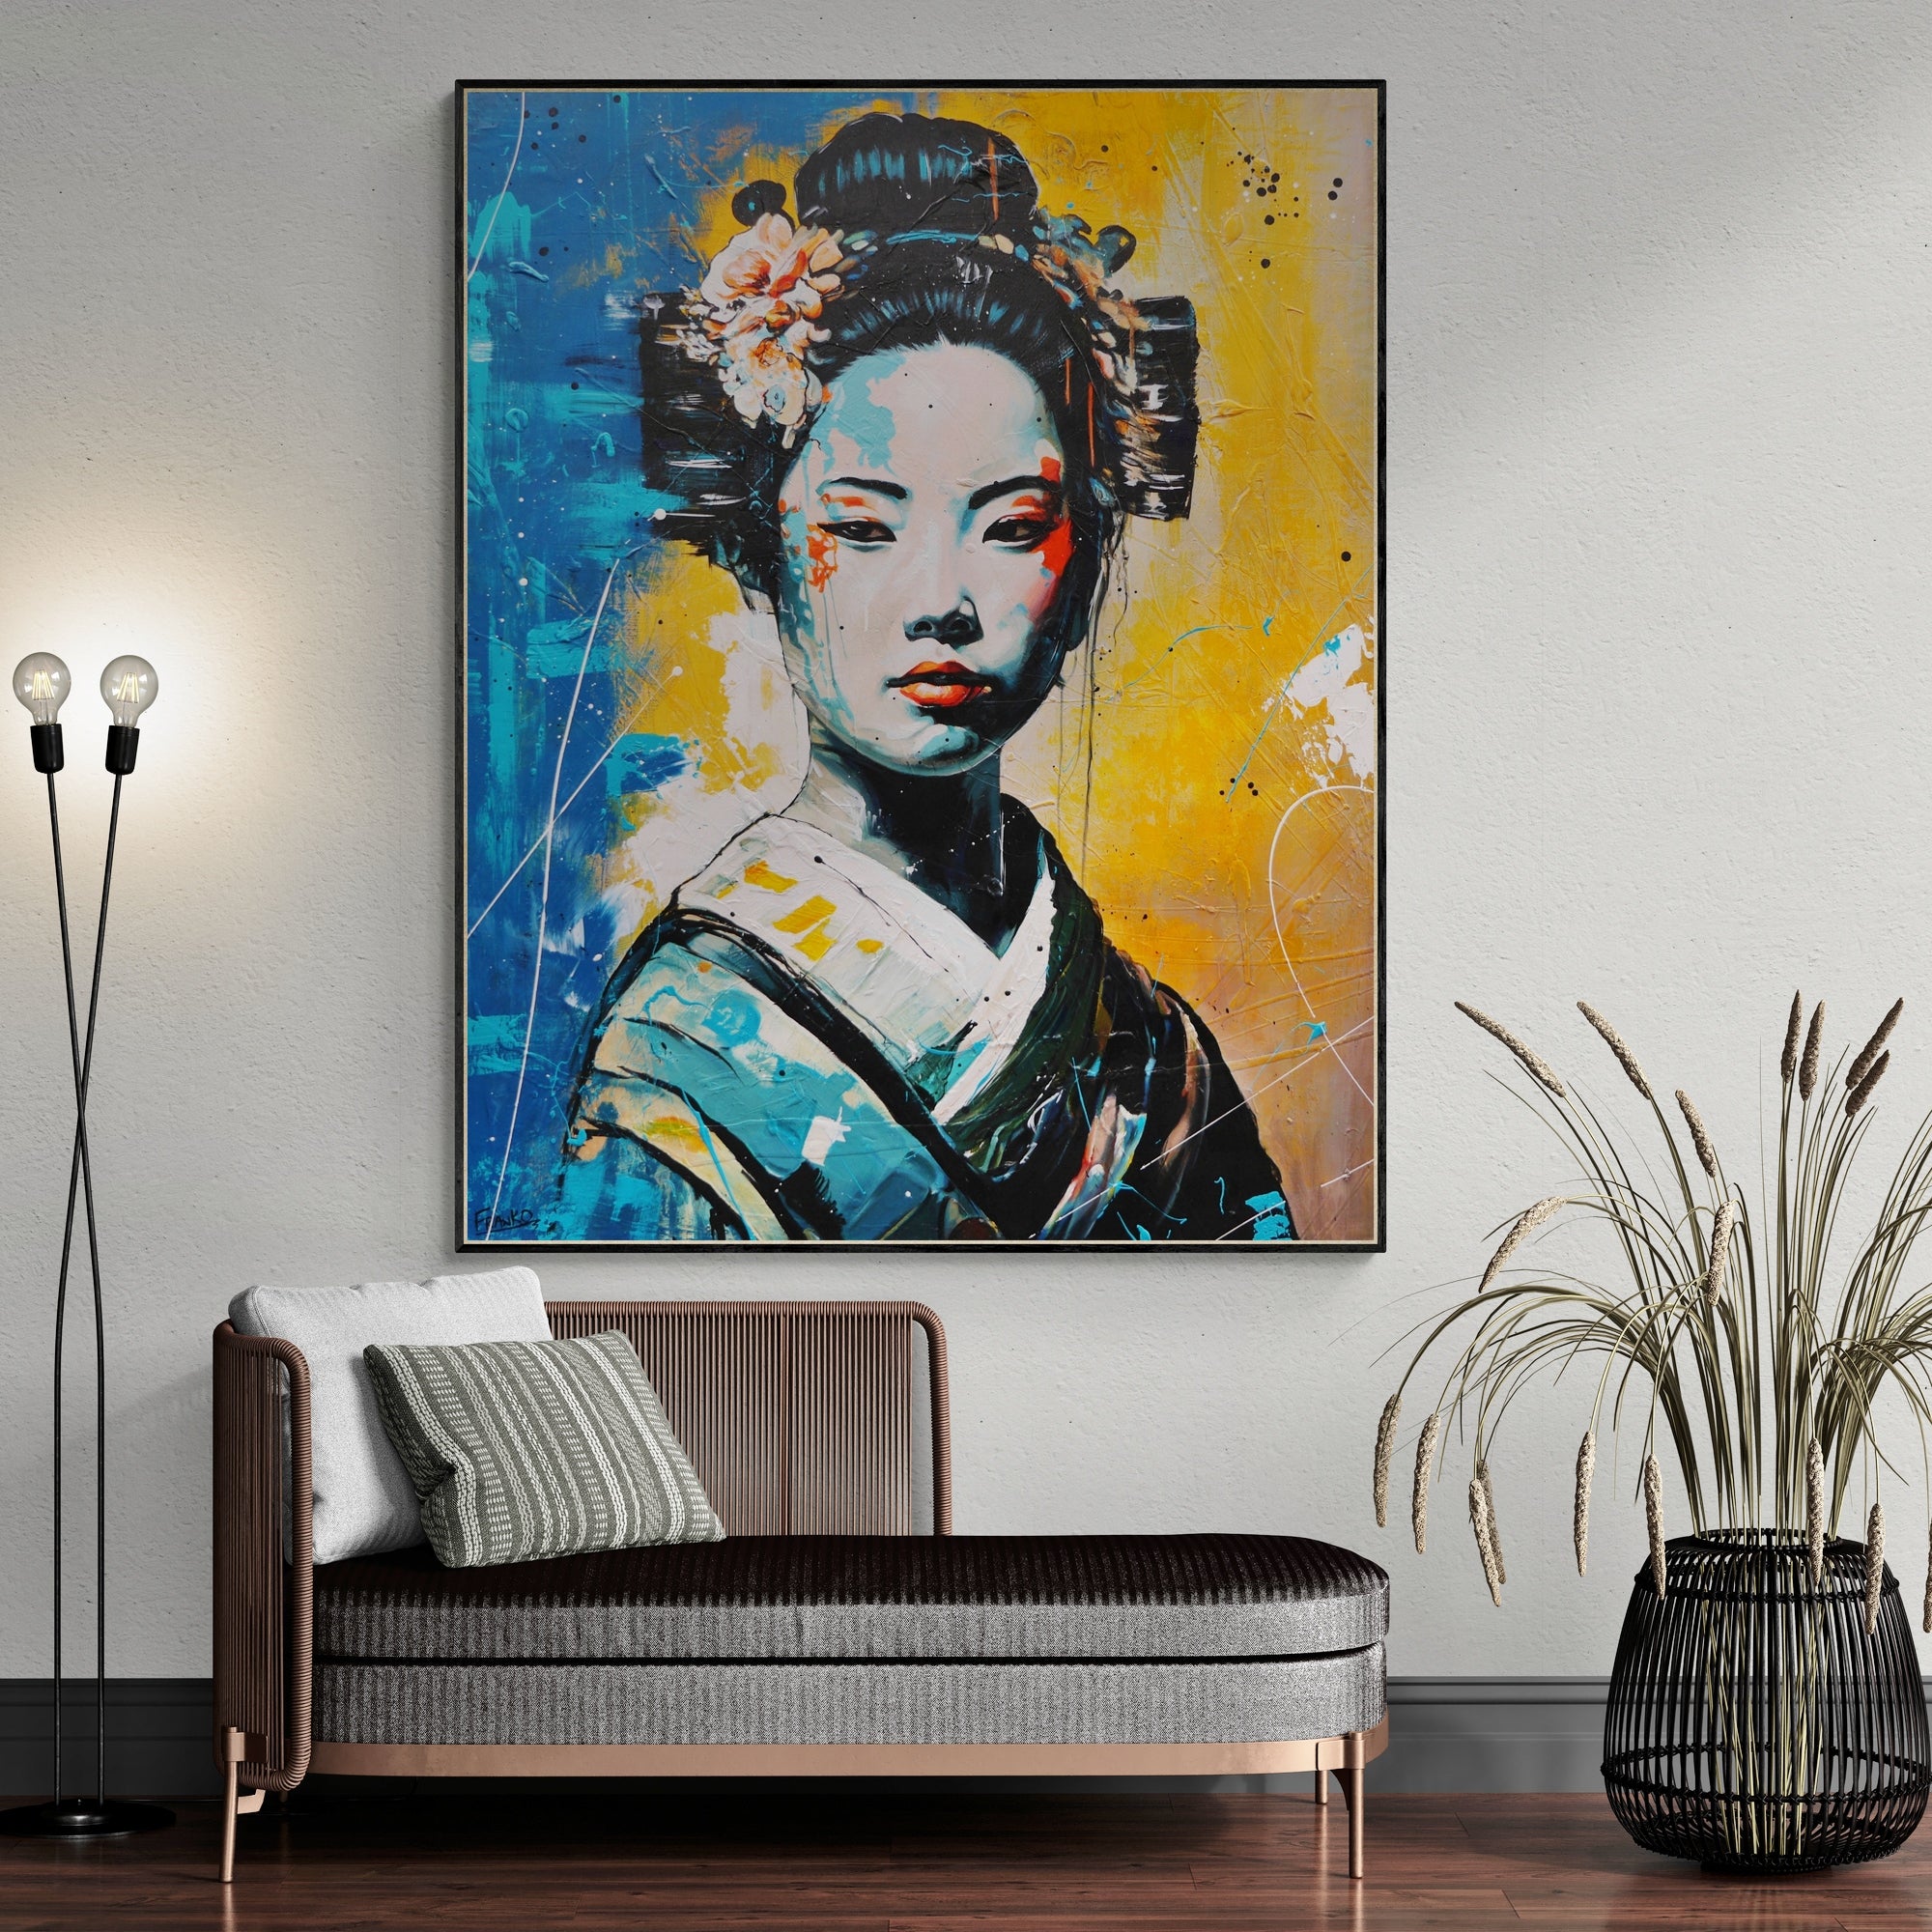 Kawaii "Pretty" 120cm x 150cm Brave and Beautiful Abstract Framed Textured Painting